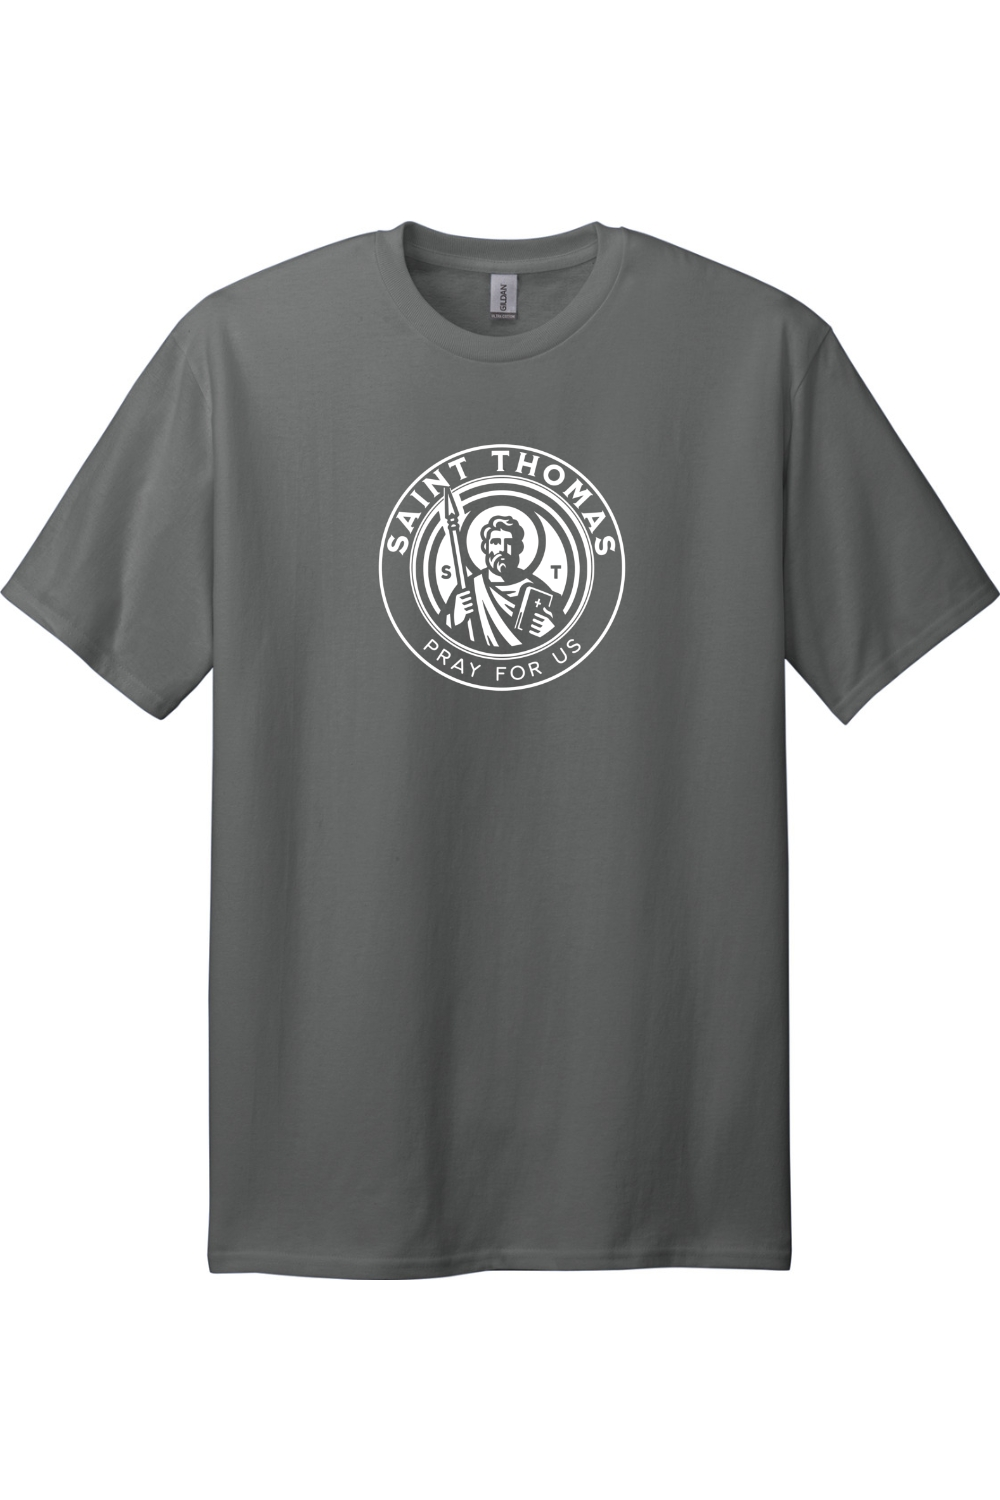 St. Thomas  - Pray For Use - Tall Size Tee